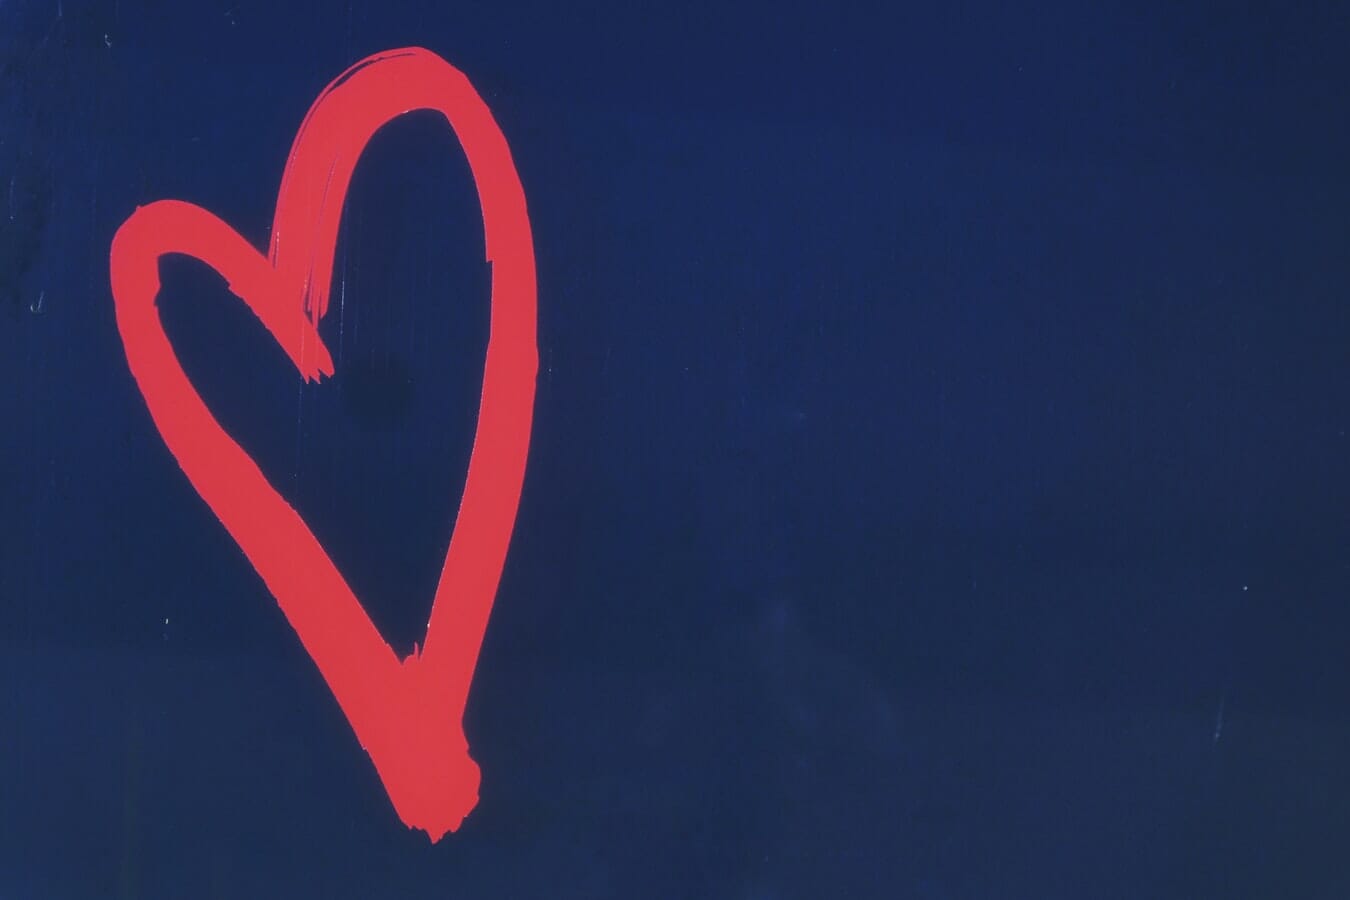 A red heart painted on a blue wall.